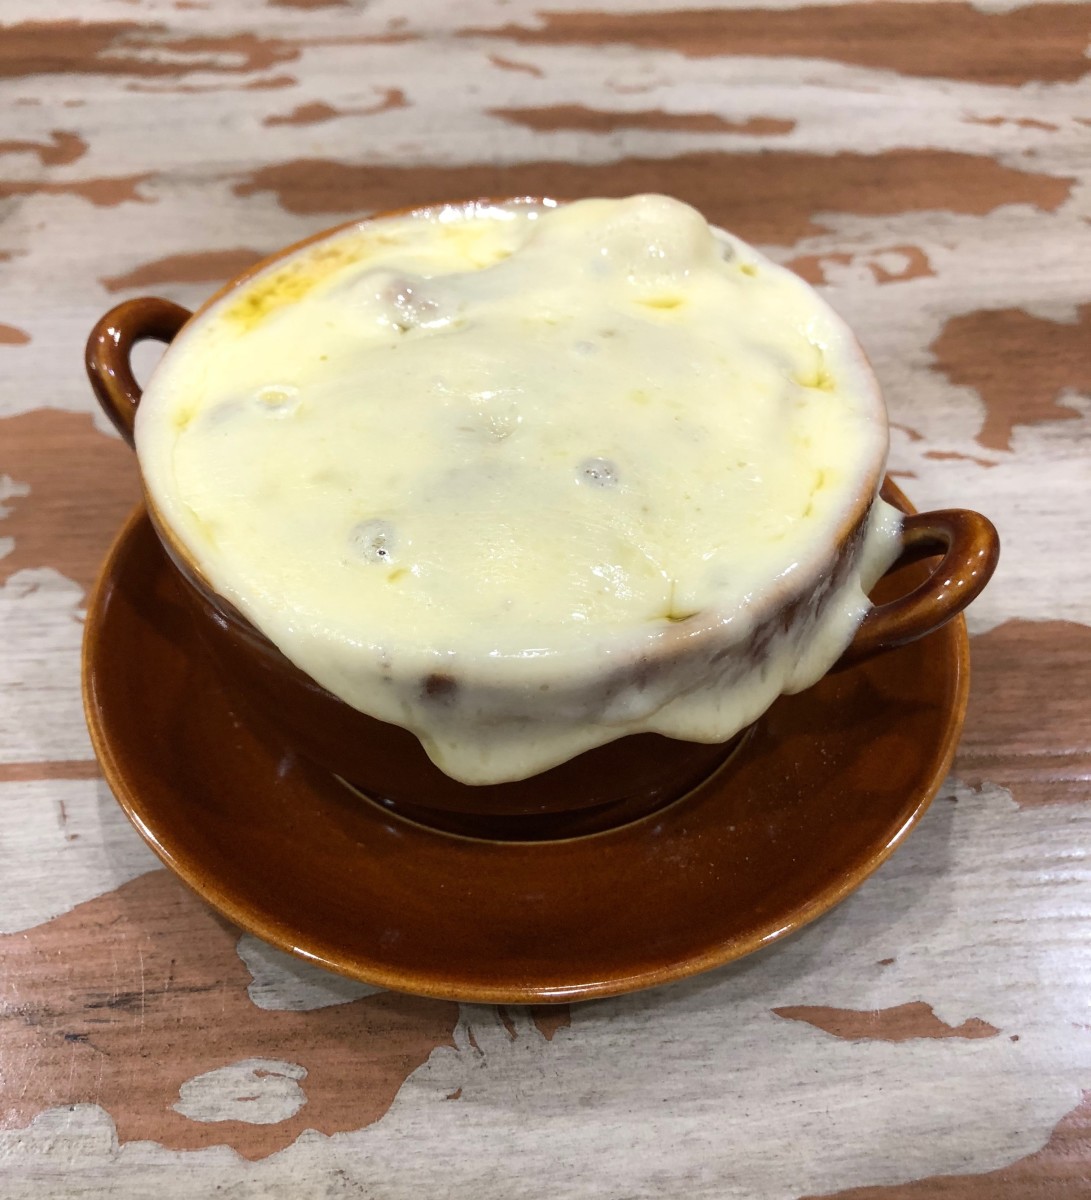 The provolone cheese is melted and the soup is ready to serve.